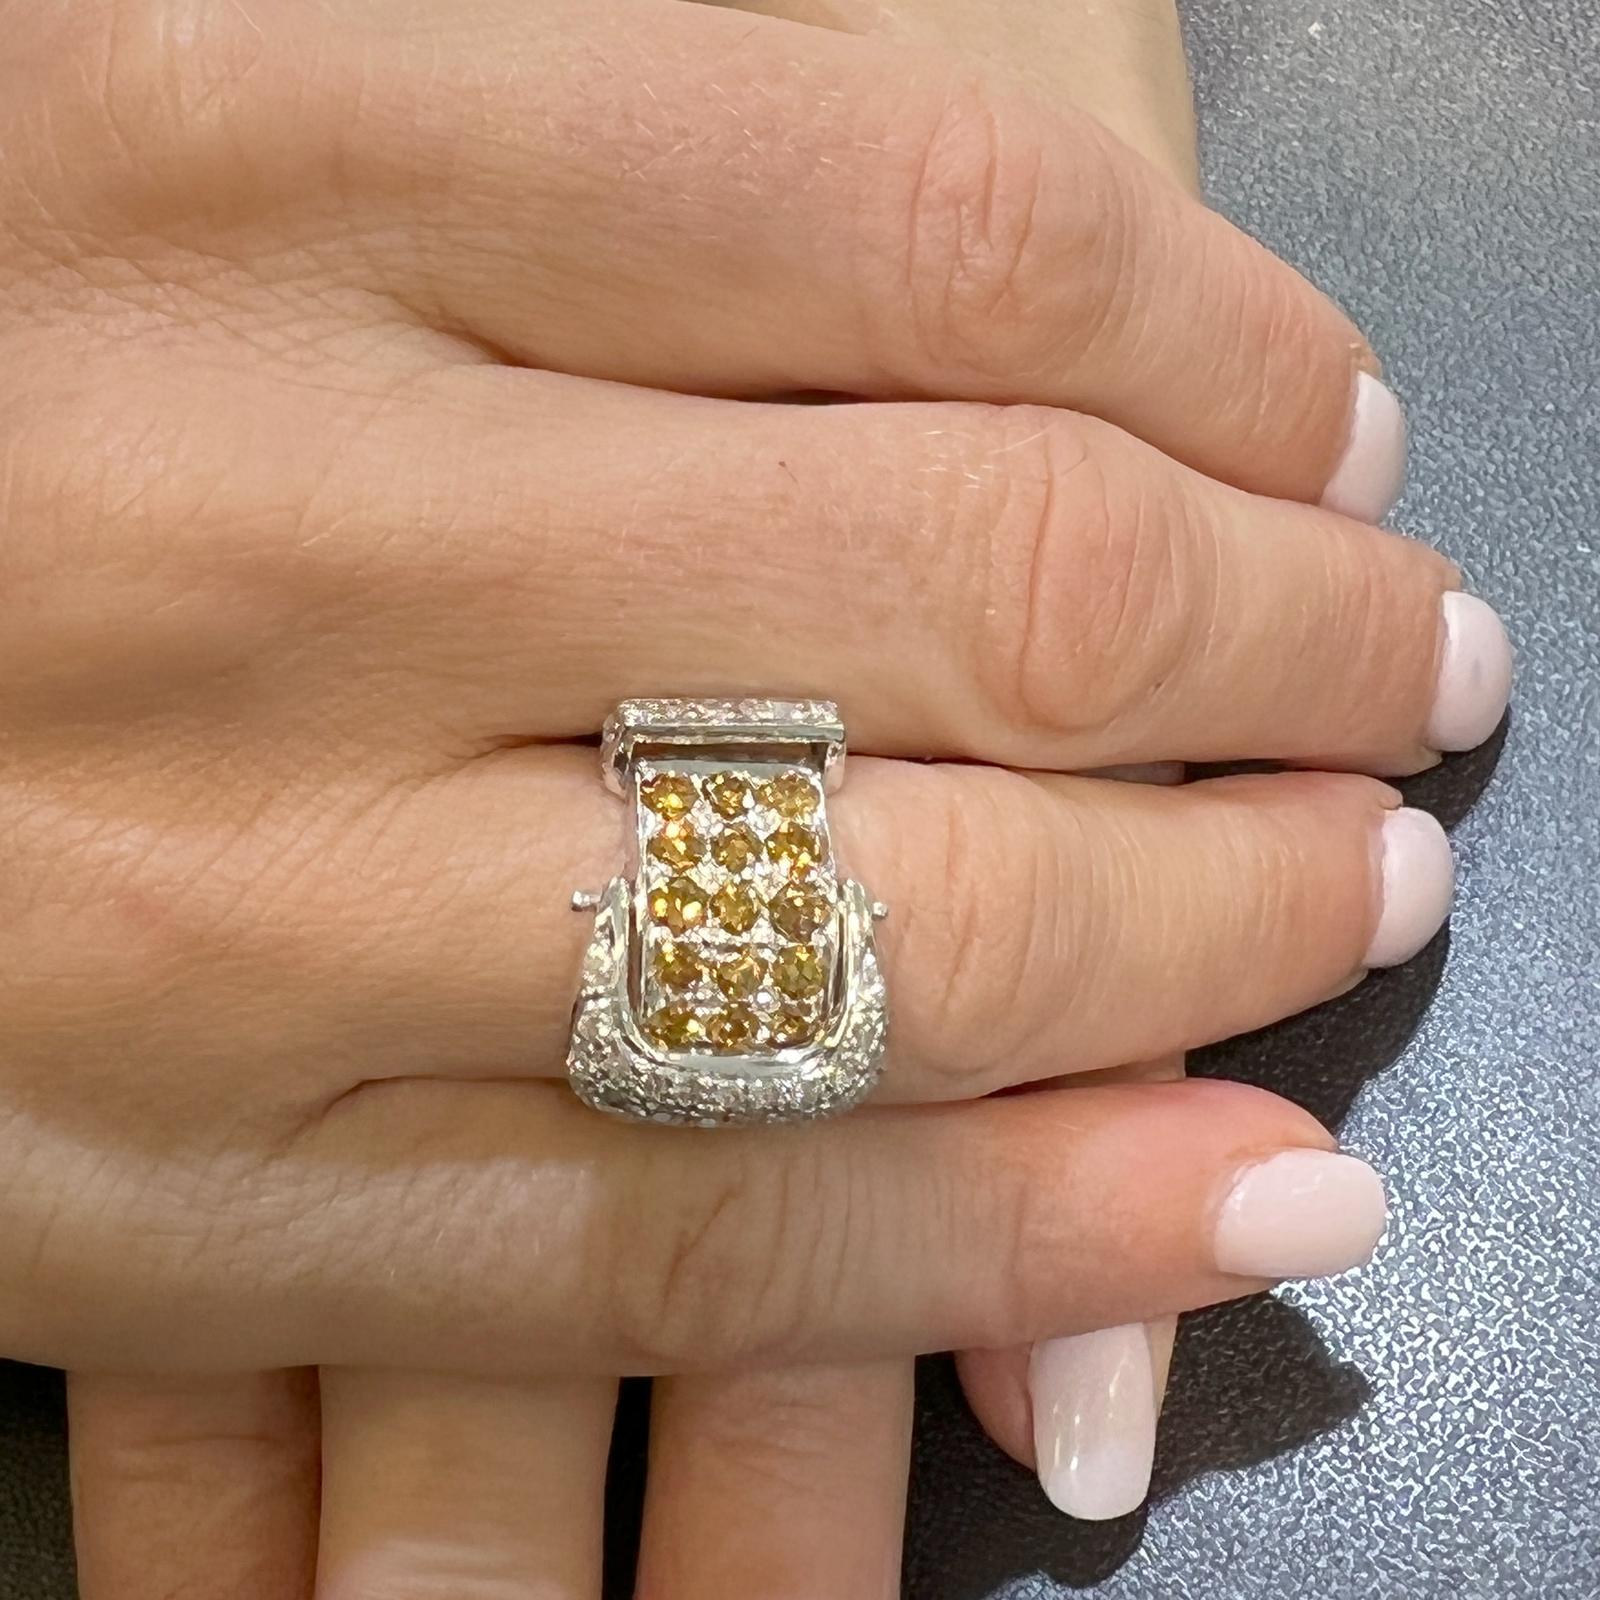 Yellow and white diamond buckle ring crafted in 14 karat white gold. The ring features 18 yellow round brilliant diamonds and 37 white round brilliant cut diamonds weighing approximately 2.20 carat total weight. The white diamonds are graded G-H